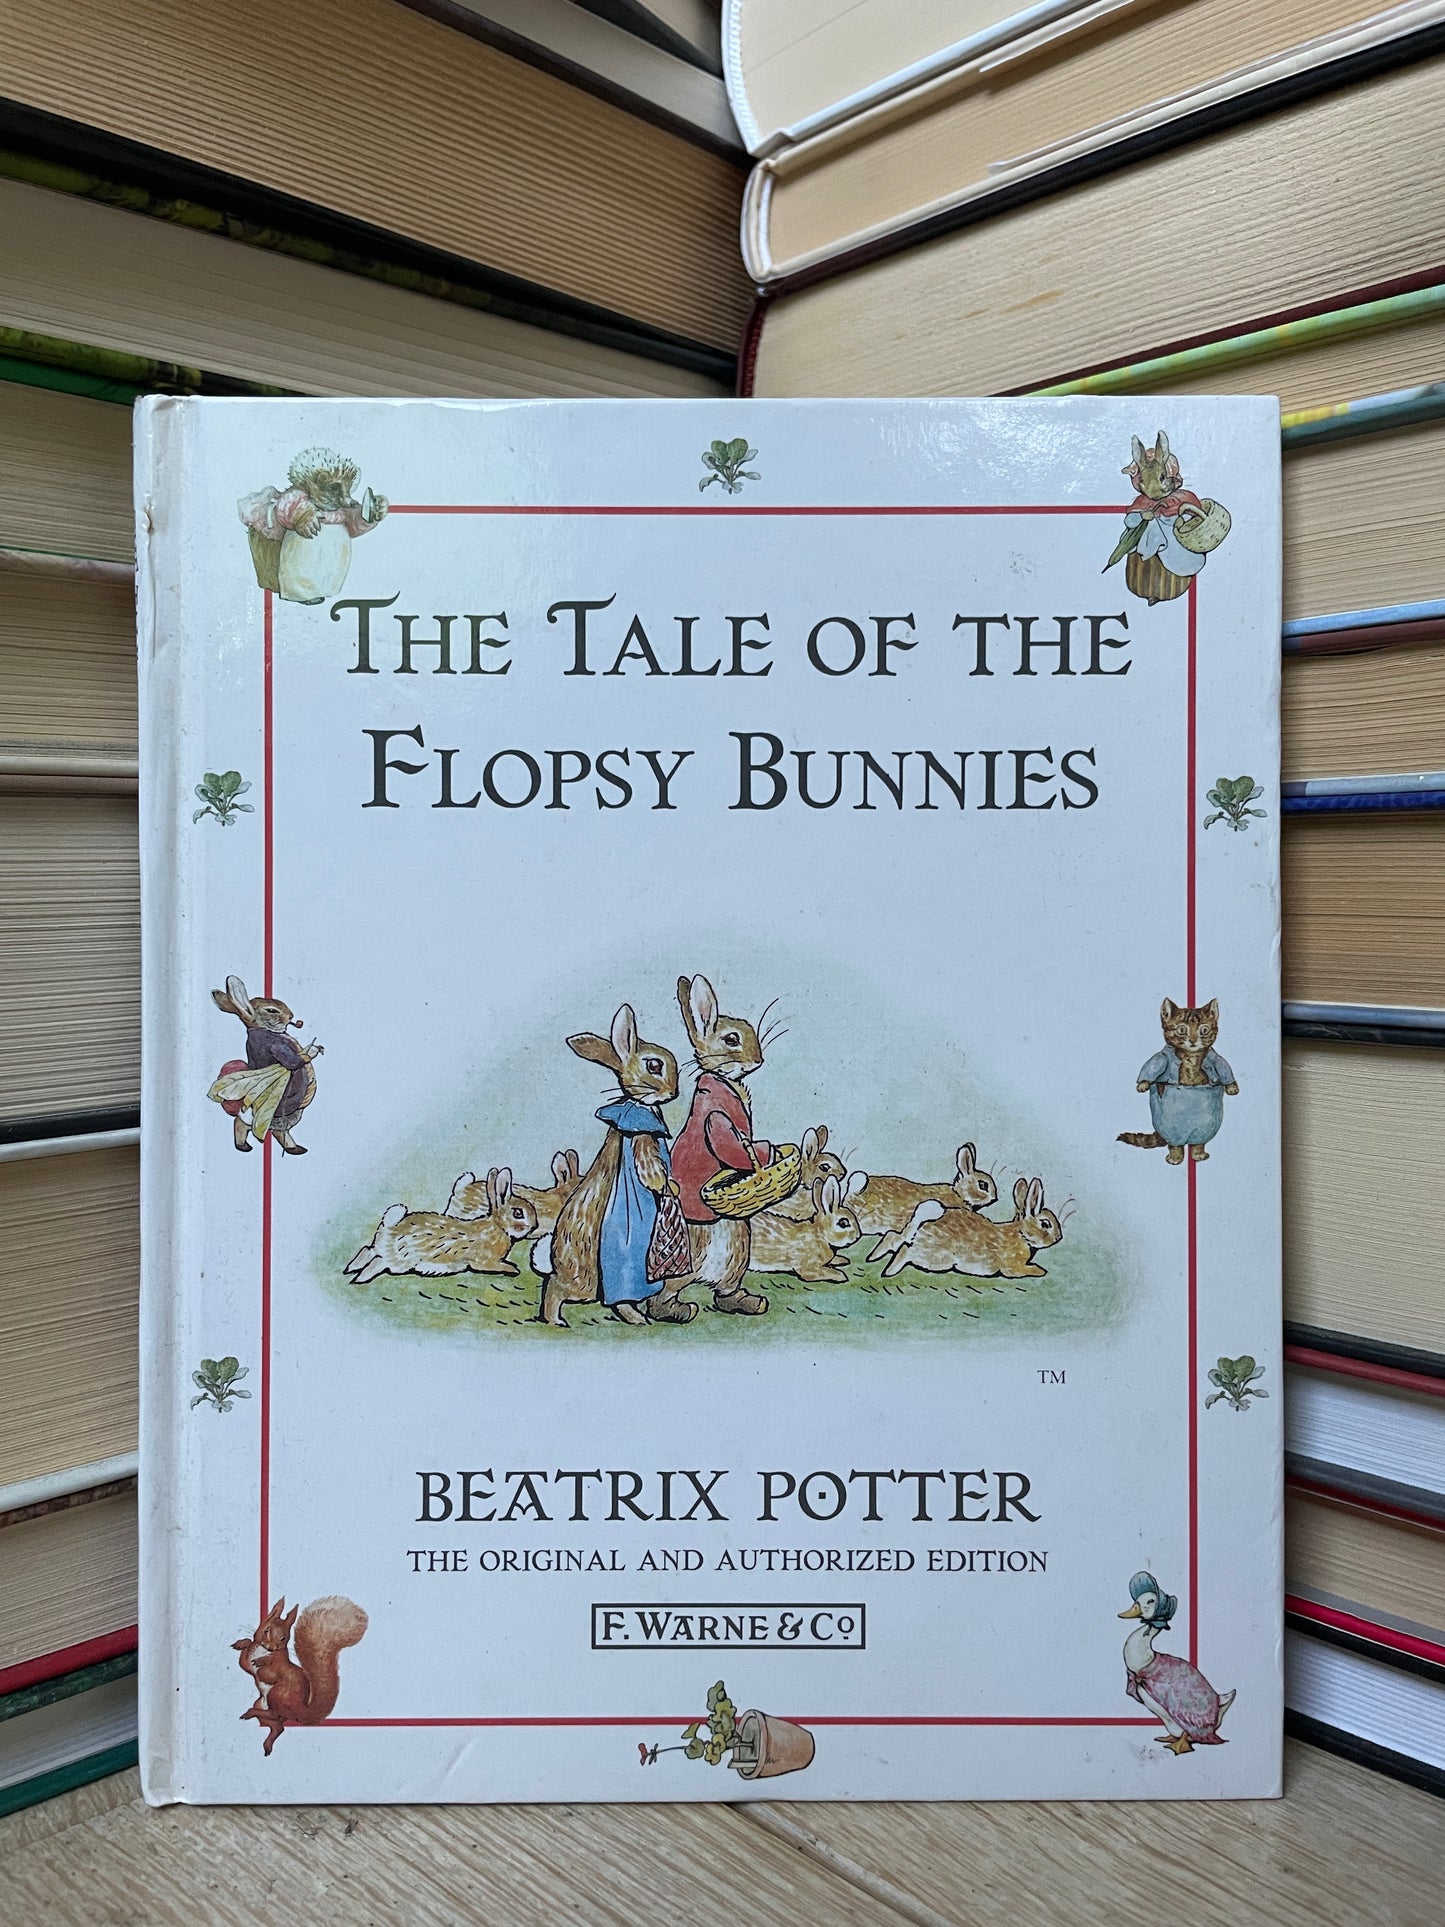 Beatrix Potter - The Tale of the Flopsy Bunnies